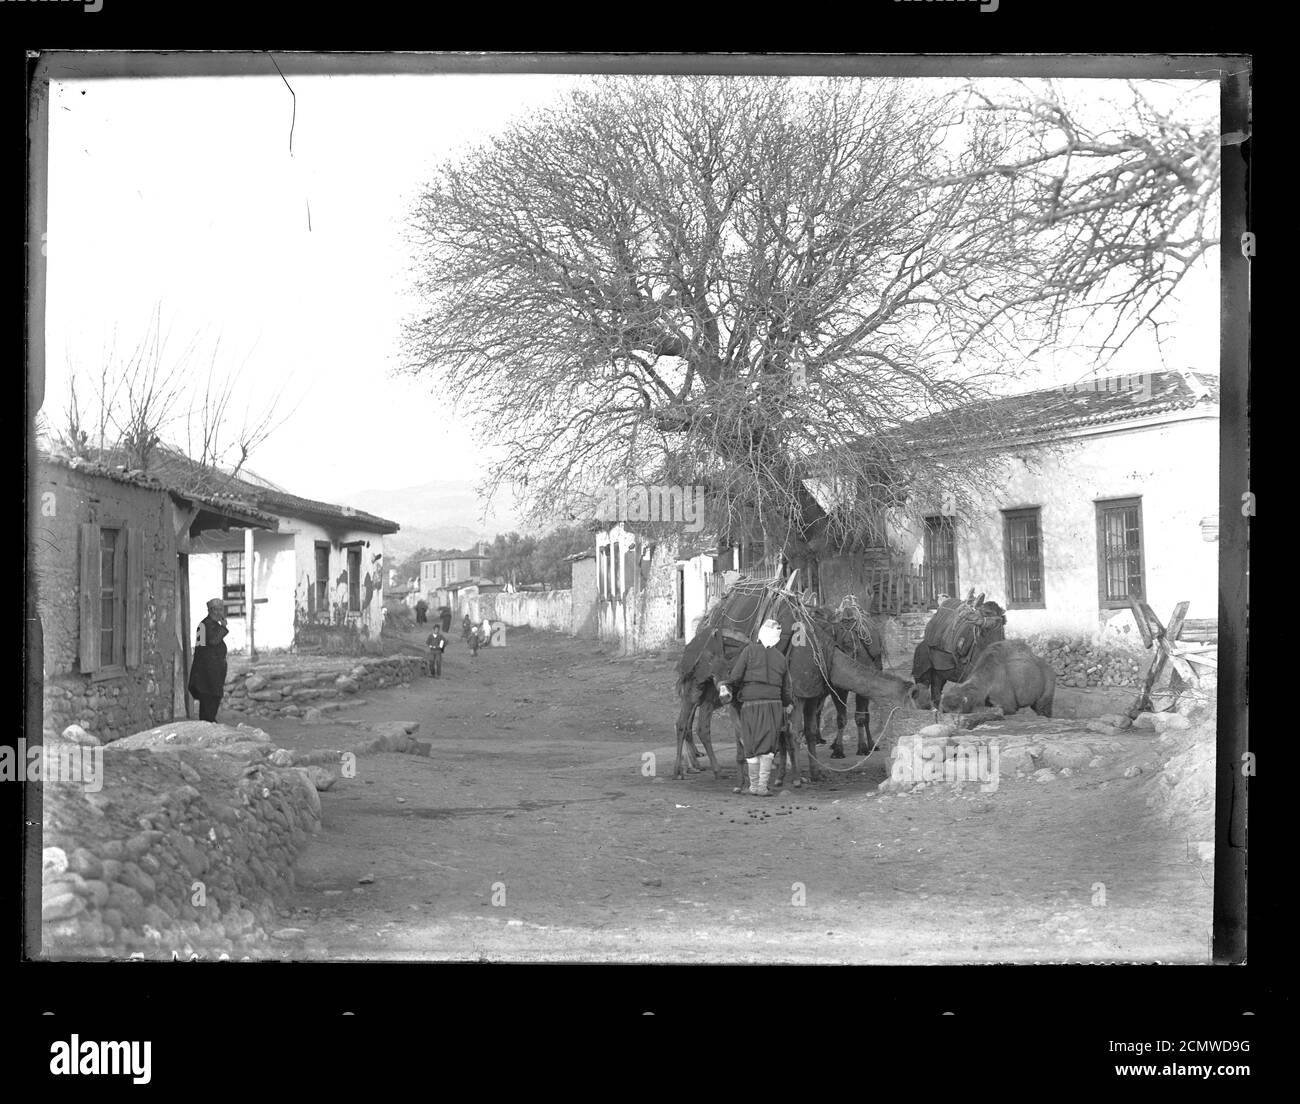 Turkey Izmir Manisa province village road in winter time. Locals walking on the road. Man with 4 camels and a donkey at a water trough. Photograph from around 1910 on dry glass plate from the Herry W. Schaefer collection. Stock Photo